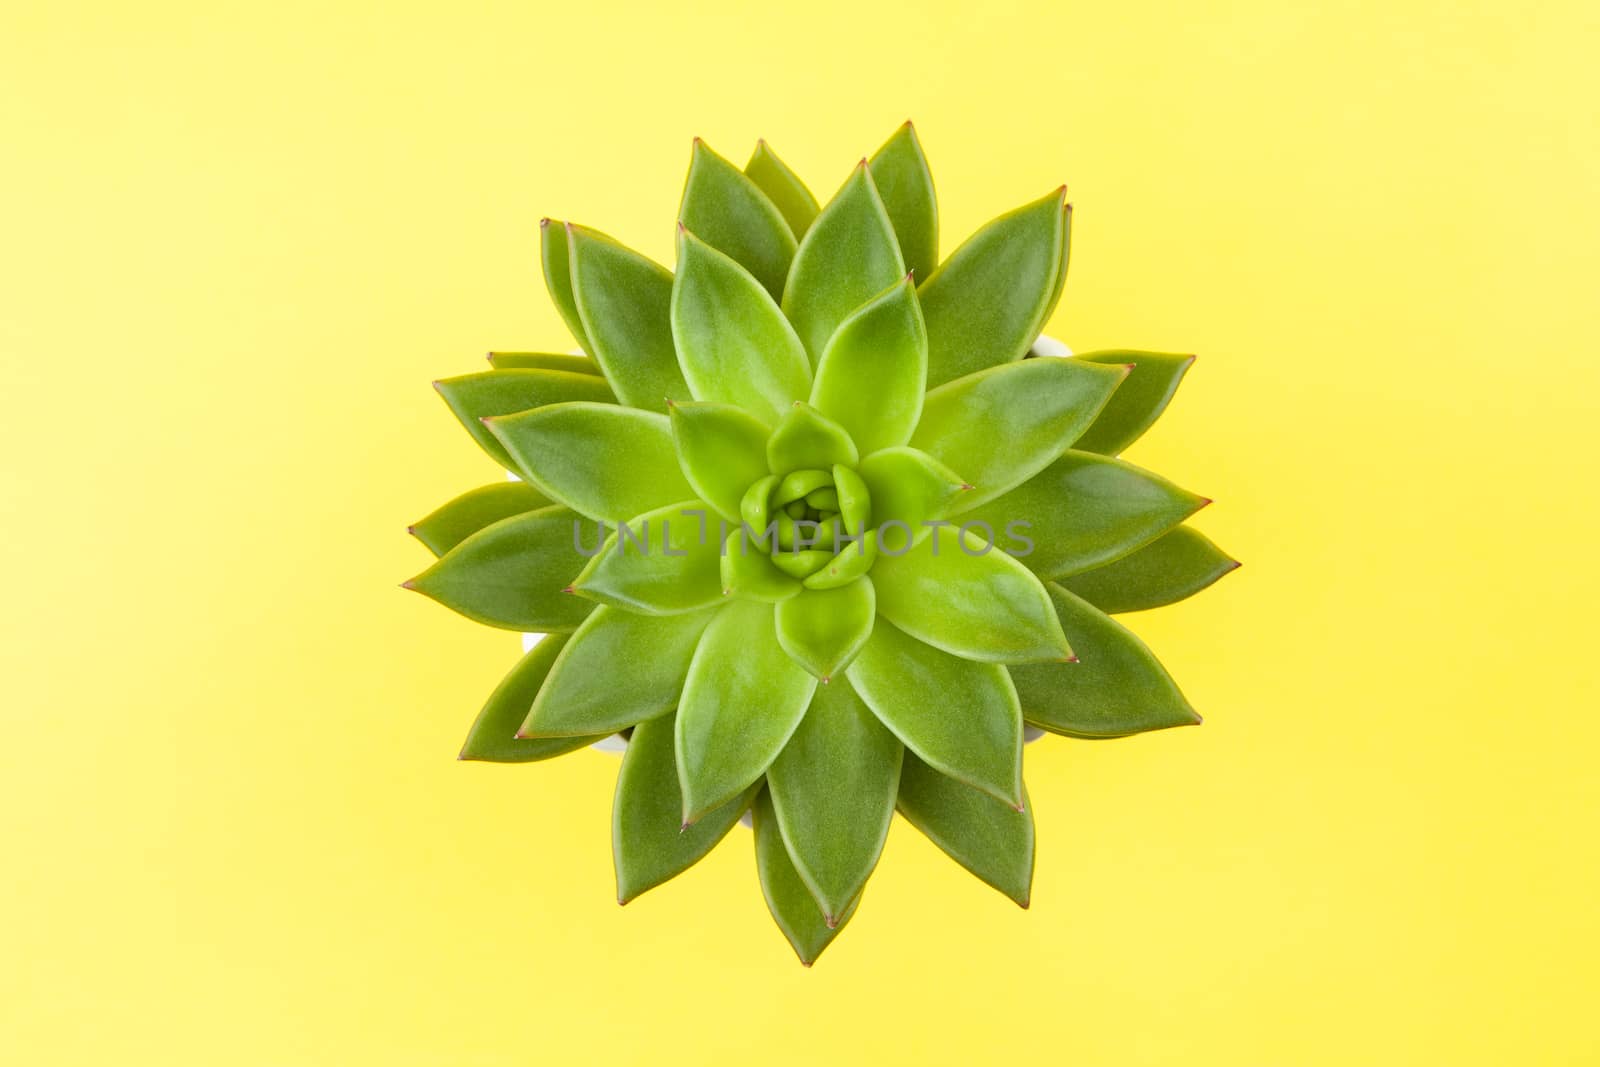 Trendy succulent Haworthia cymbiformis closeup on yellow background, copy space, flatly. For social media, poster, interior, blog, flower shop, packing overfilling. Home gardening concept. Horizontal by ALLUNEED